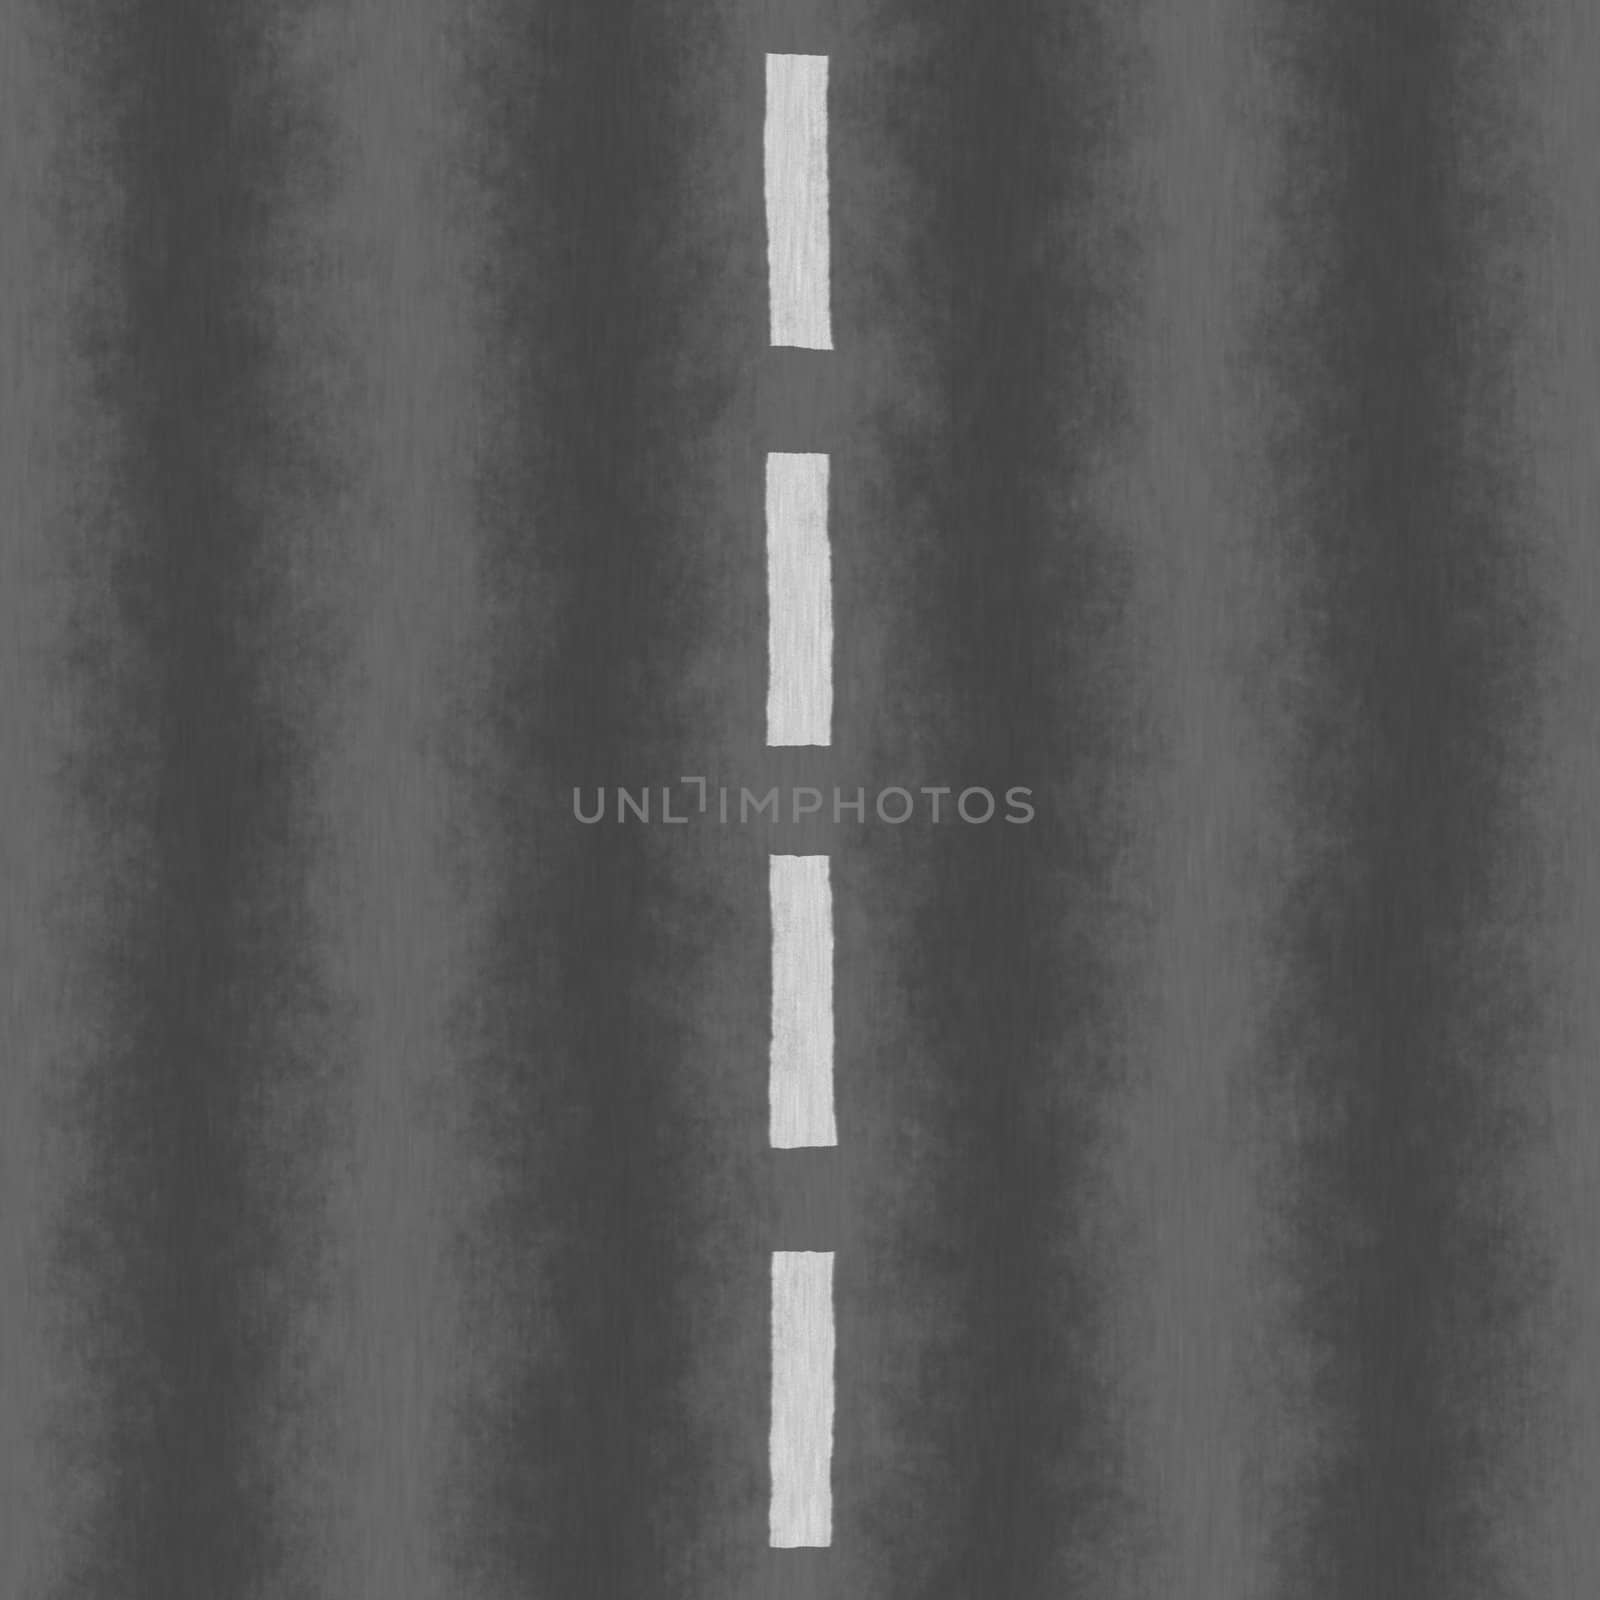 An empty roadway texture with a white dotted line dividing the two lanes.